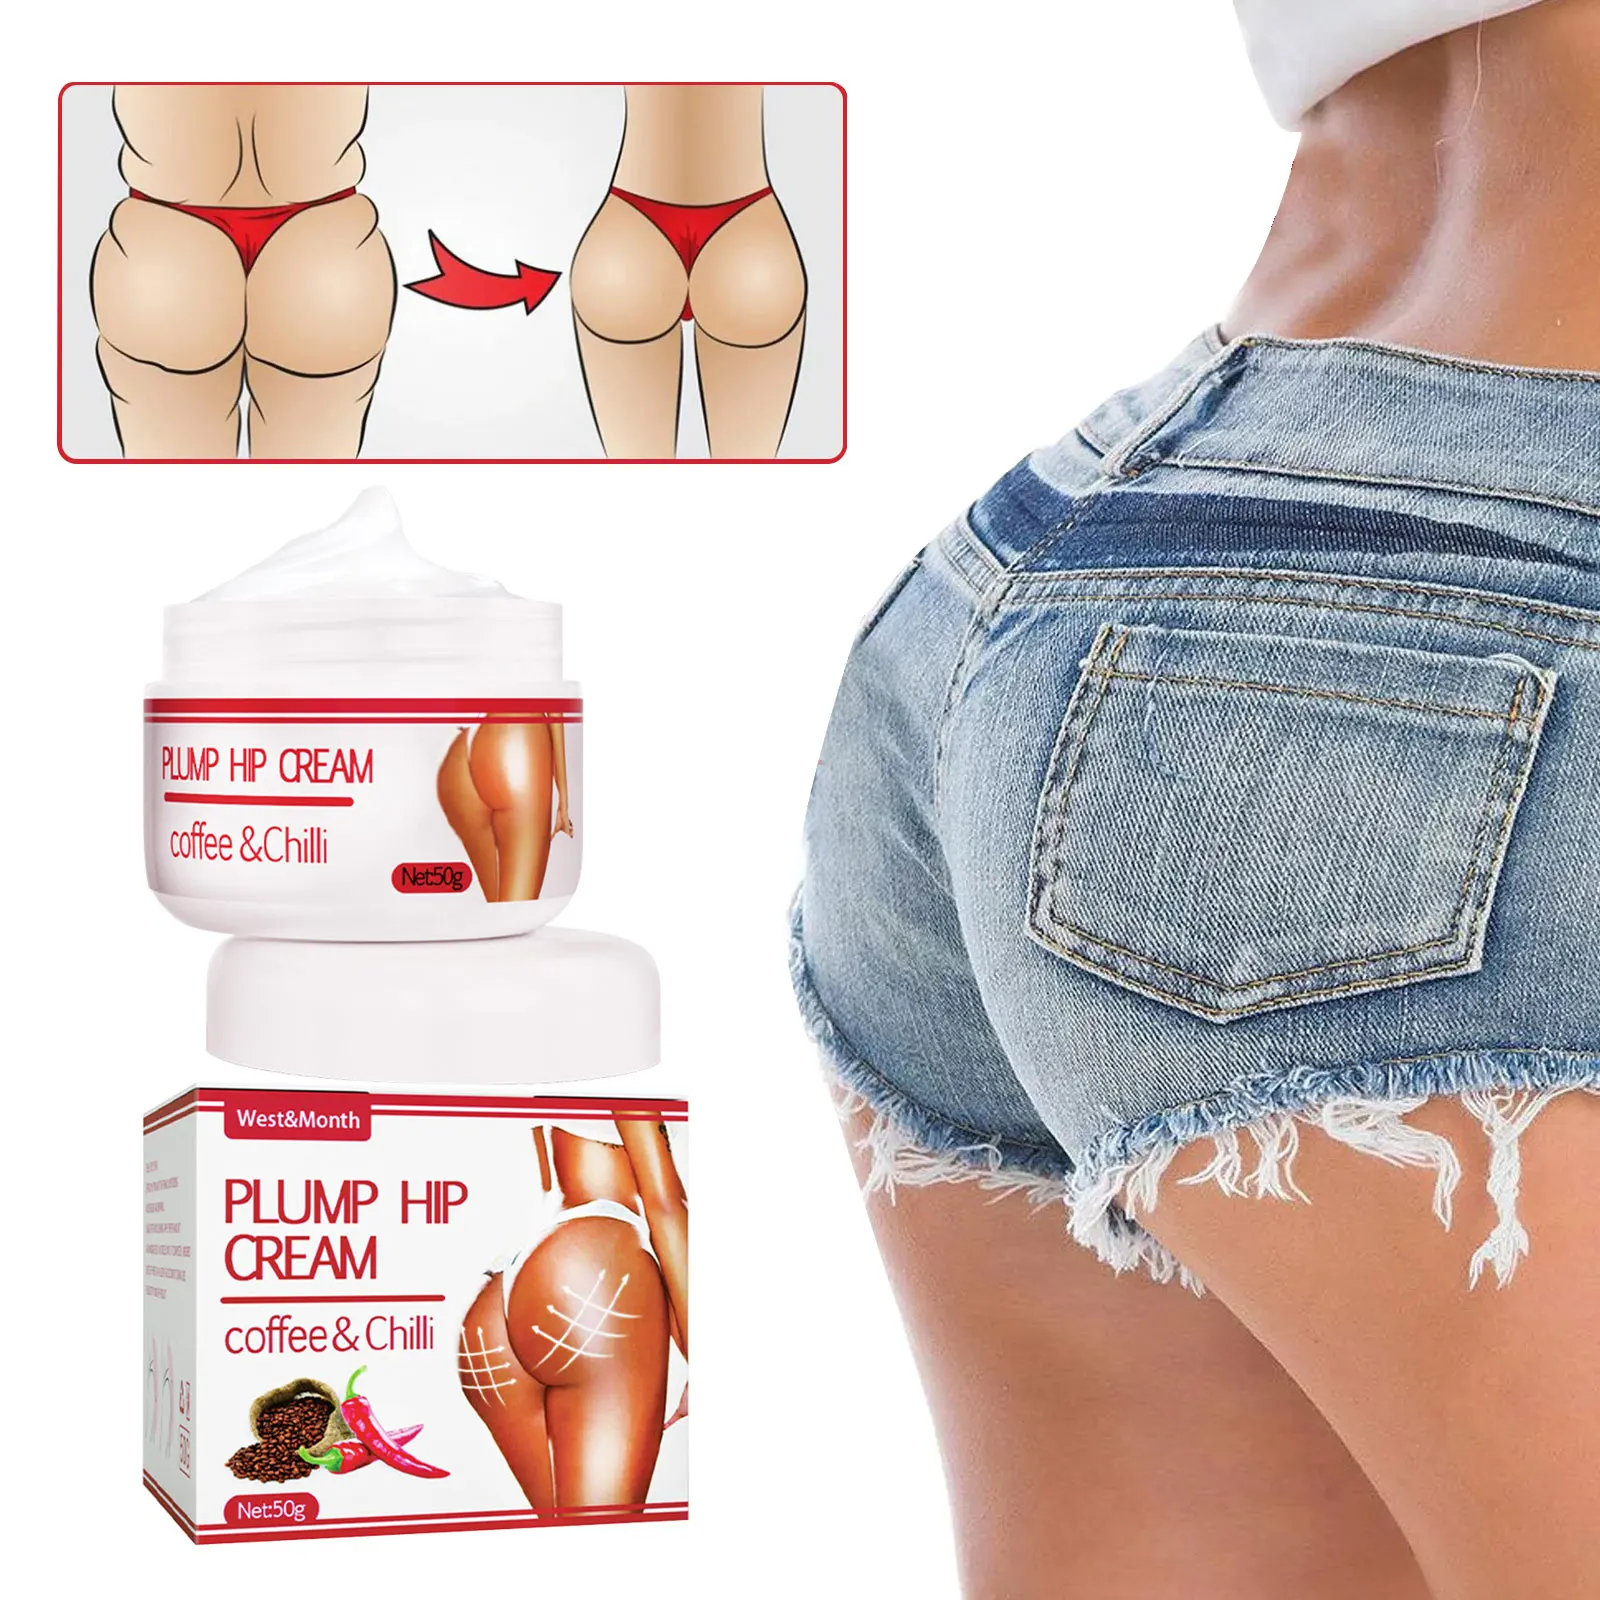 

Big Ass Cream Sexy Fast Growth Butt Increase Elasticity Lifing Firming Promote Female Hormone Plump Buttock Hip Lift up Lotion